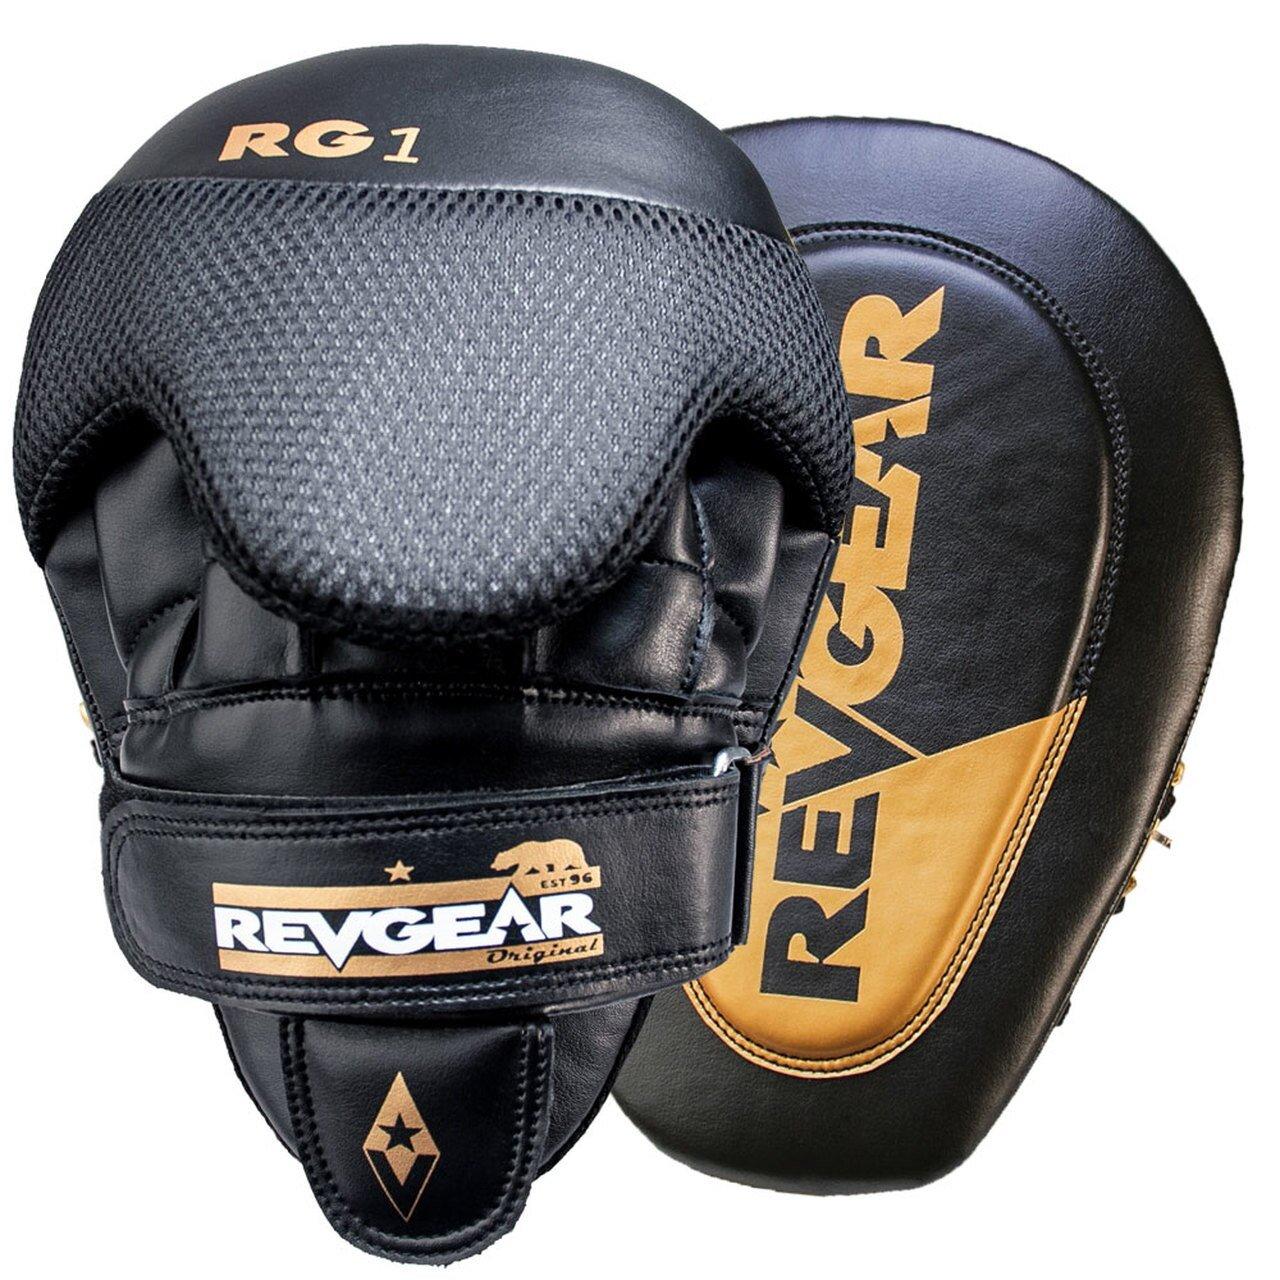 FIGHTR® Premium Boxing Mitts MMA Focus Mitts for Boxing etc. Ideal Padding & Stability Muay Thai Carry Bag Punching Mitts for Martial Arts incl 